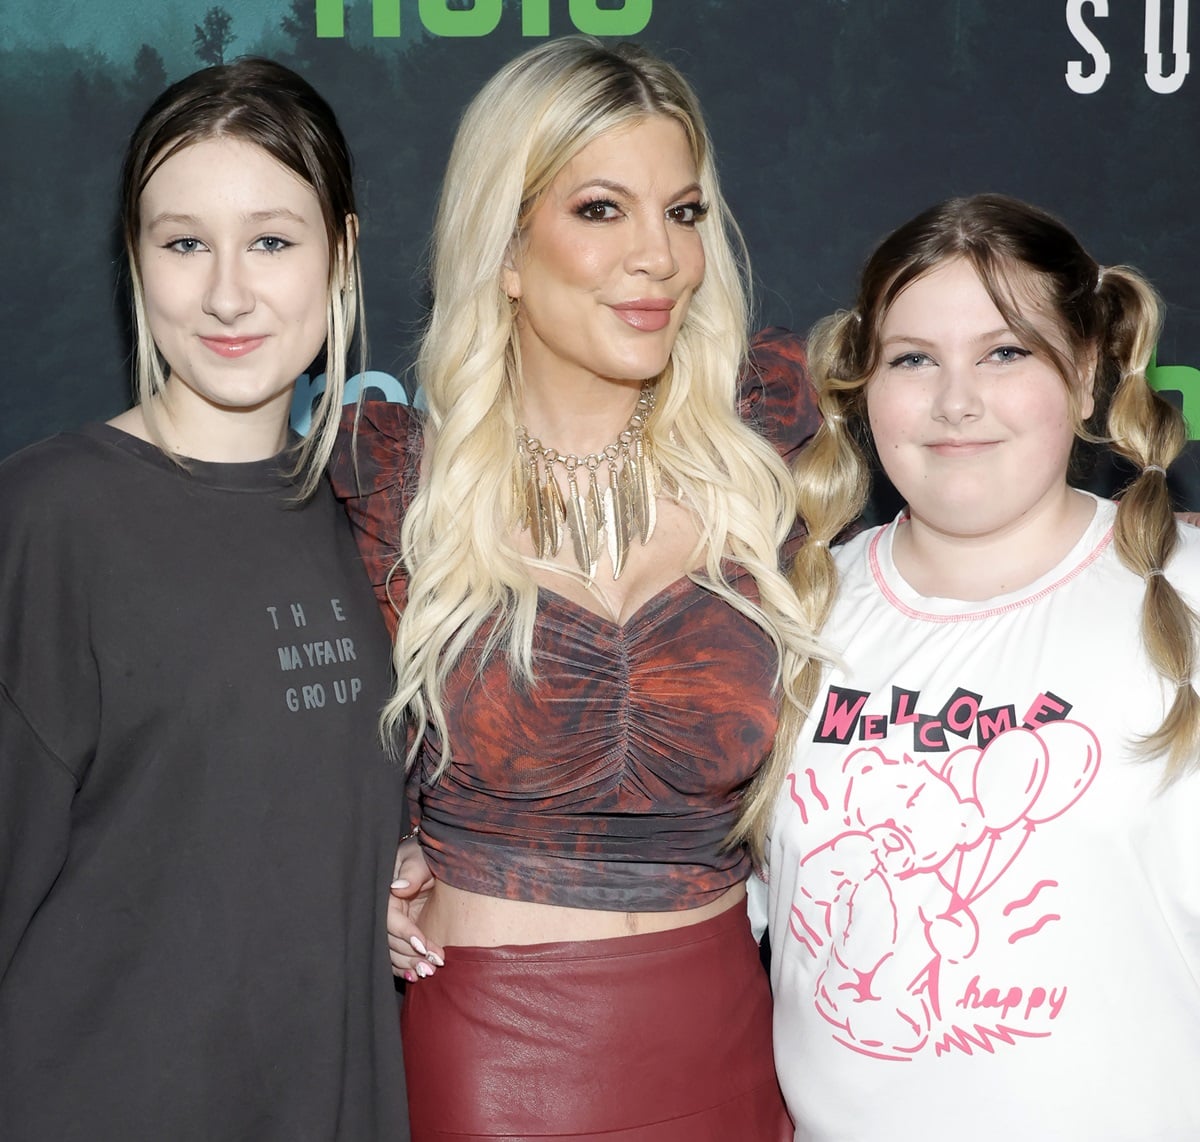 Accompanied by her two daughters, 14-year-old Stella Doreen McDermott and 11-year-old Hattie Margaret McDermott, the mother of five graced the premiere of Freeform's second season of "Cruel Summer" in Los Angeles